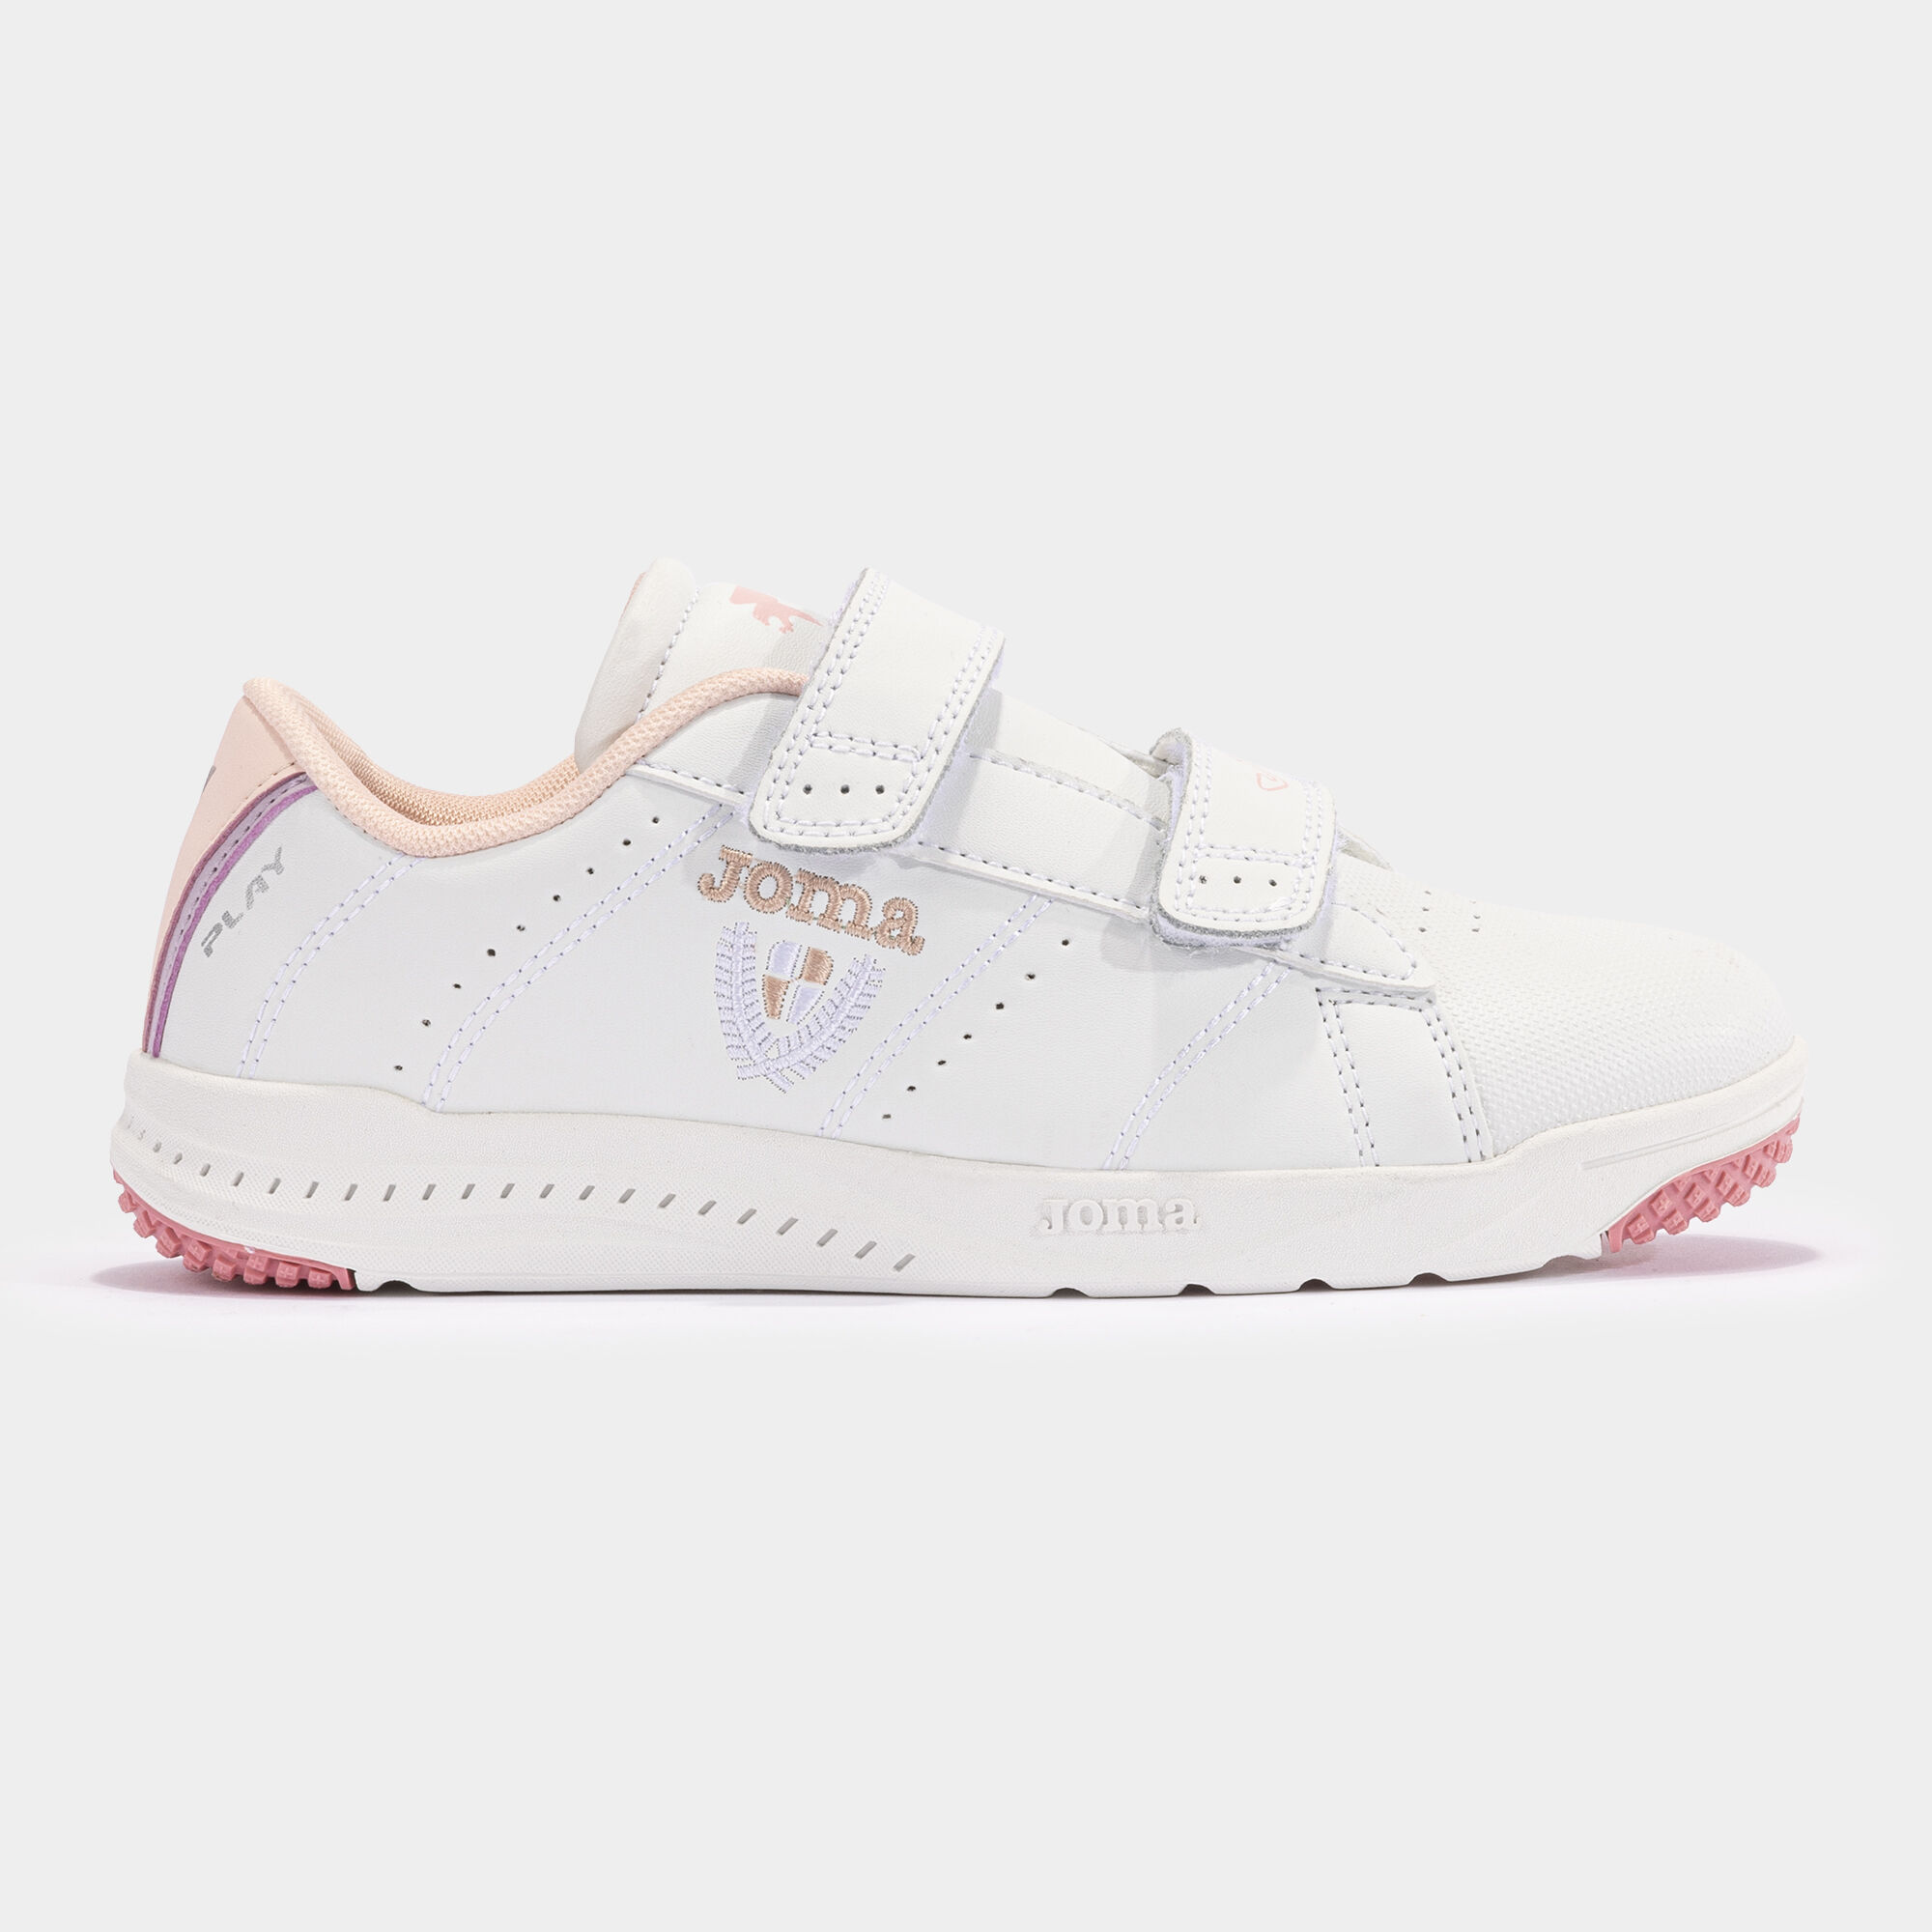 Casual shoes W.Play Jr 23 junior white pink